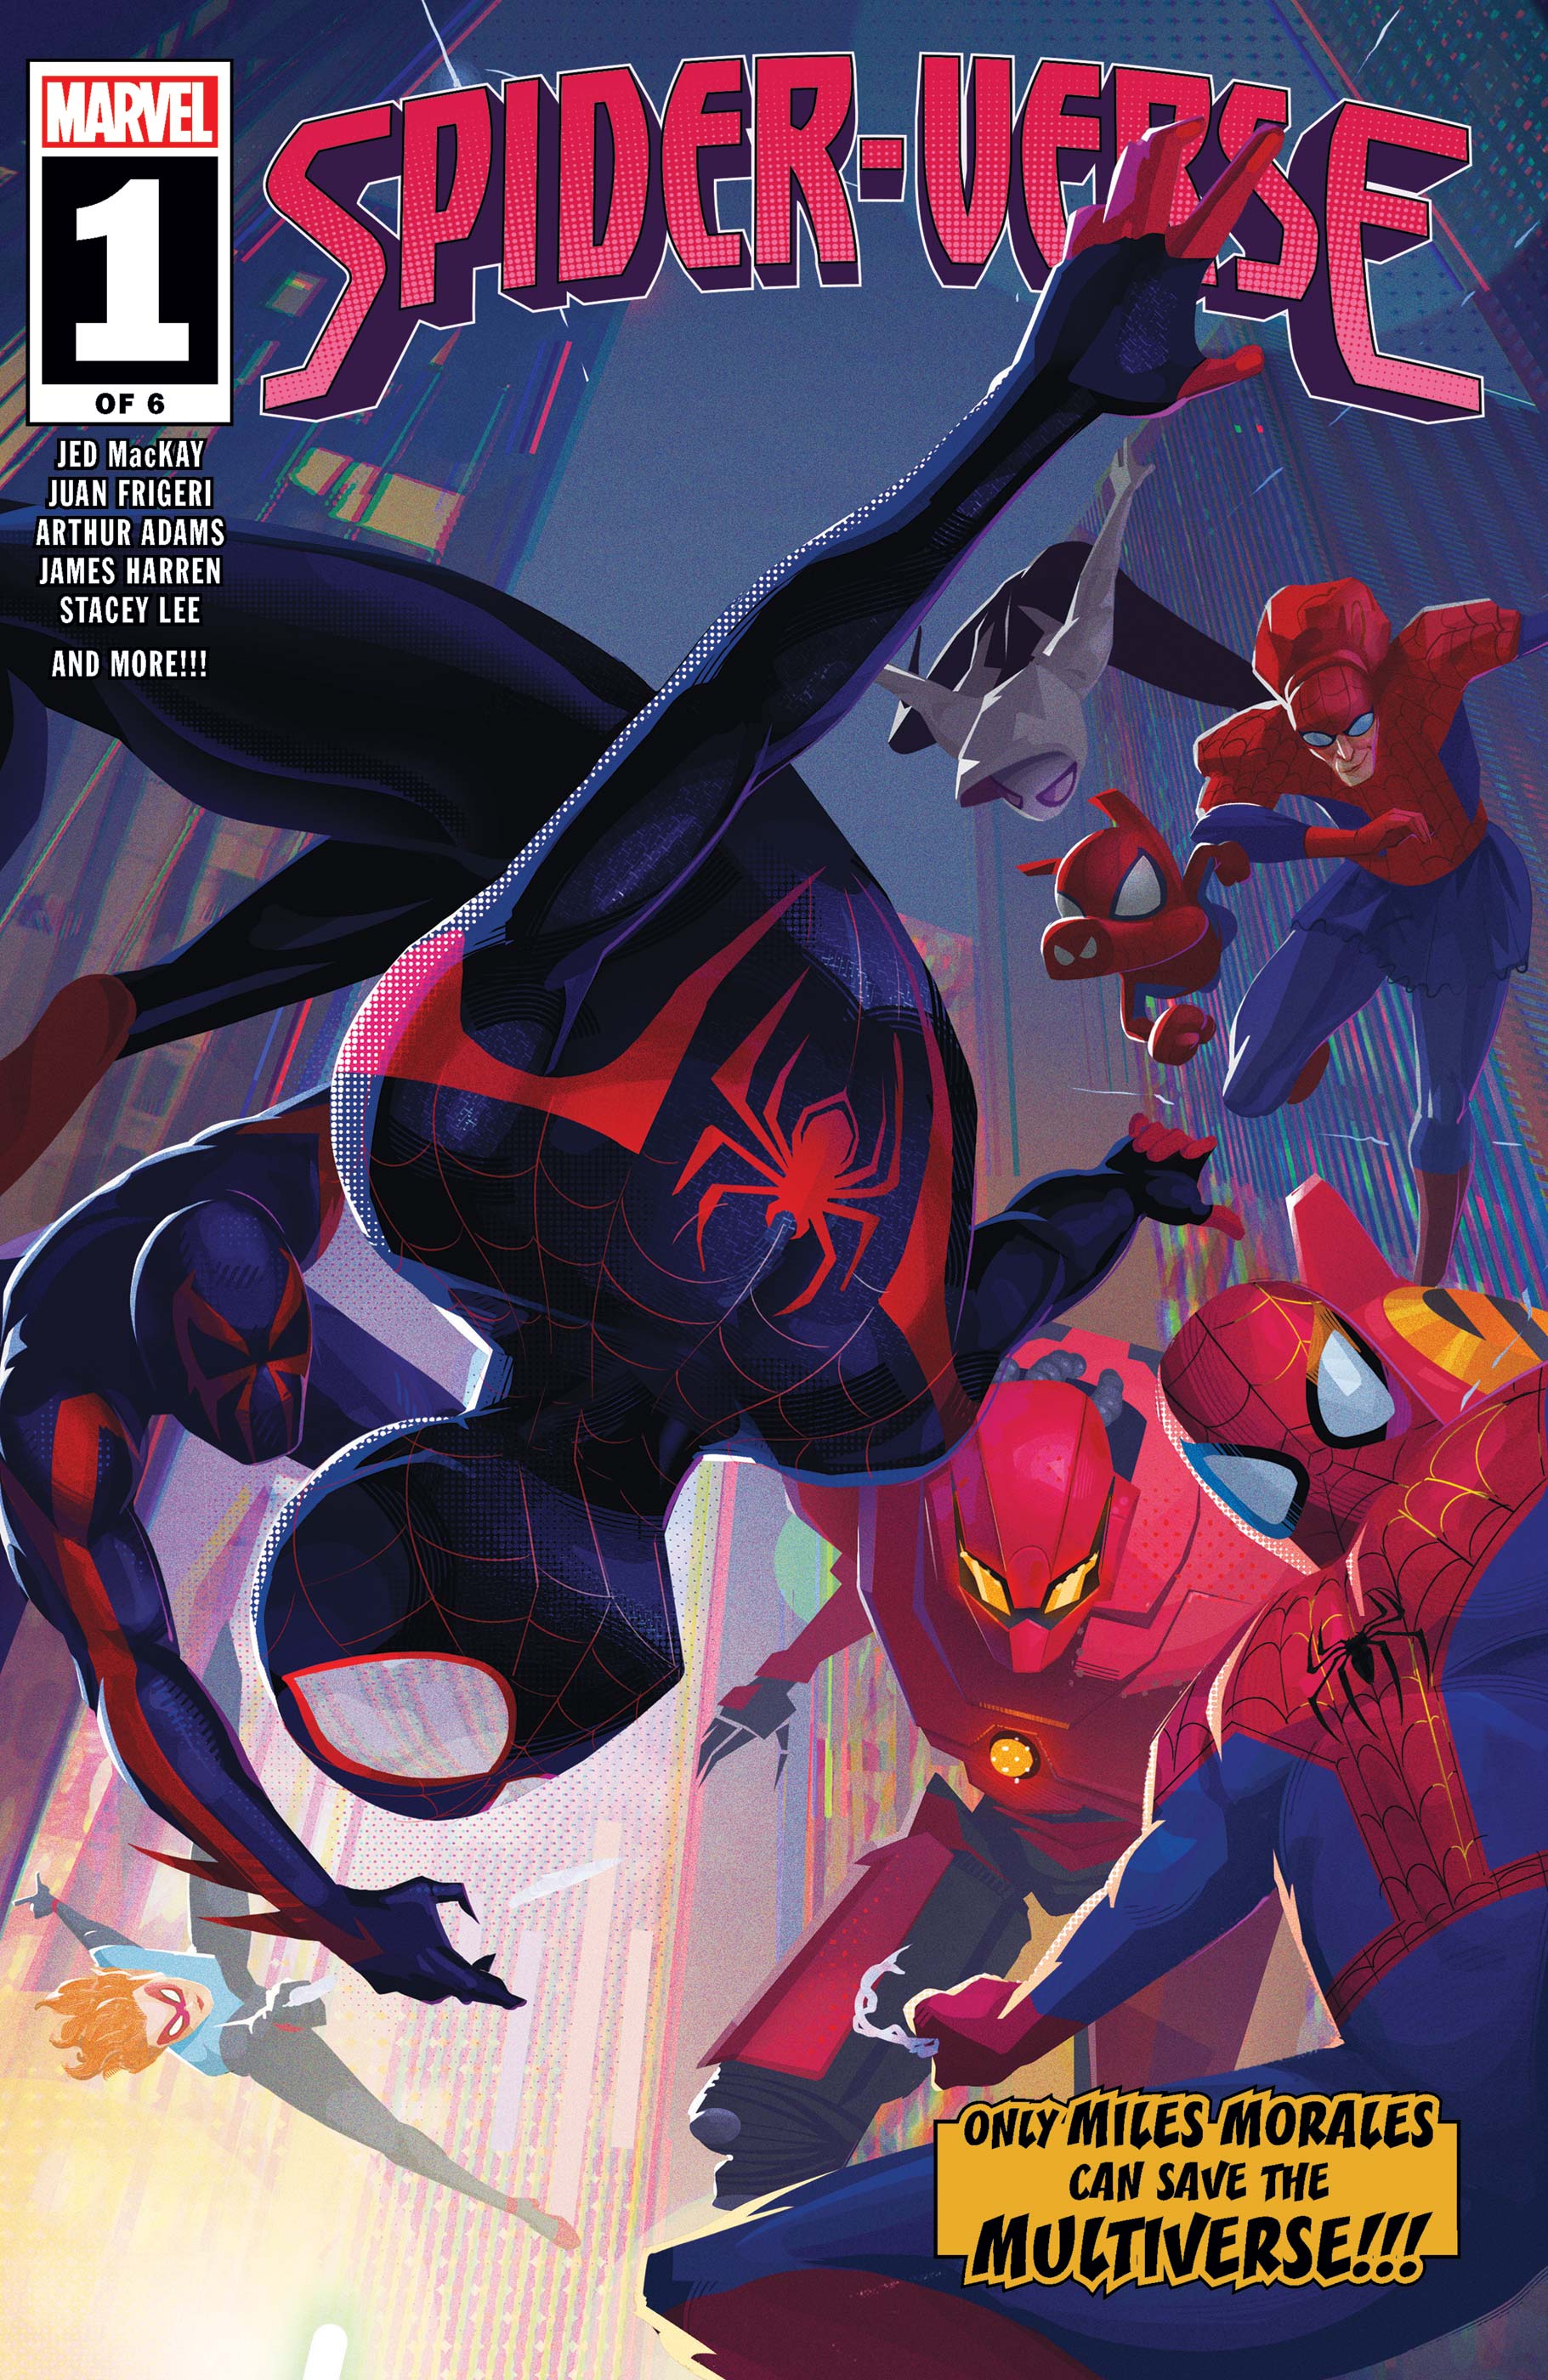 Spider-Verse (2019) #1 | Comic Issues | Marvel